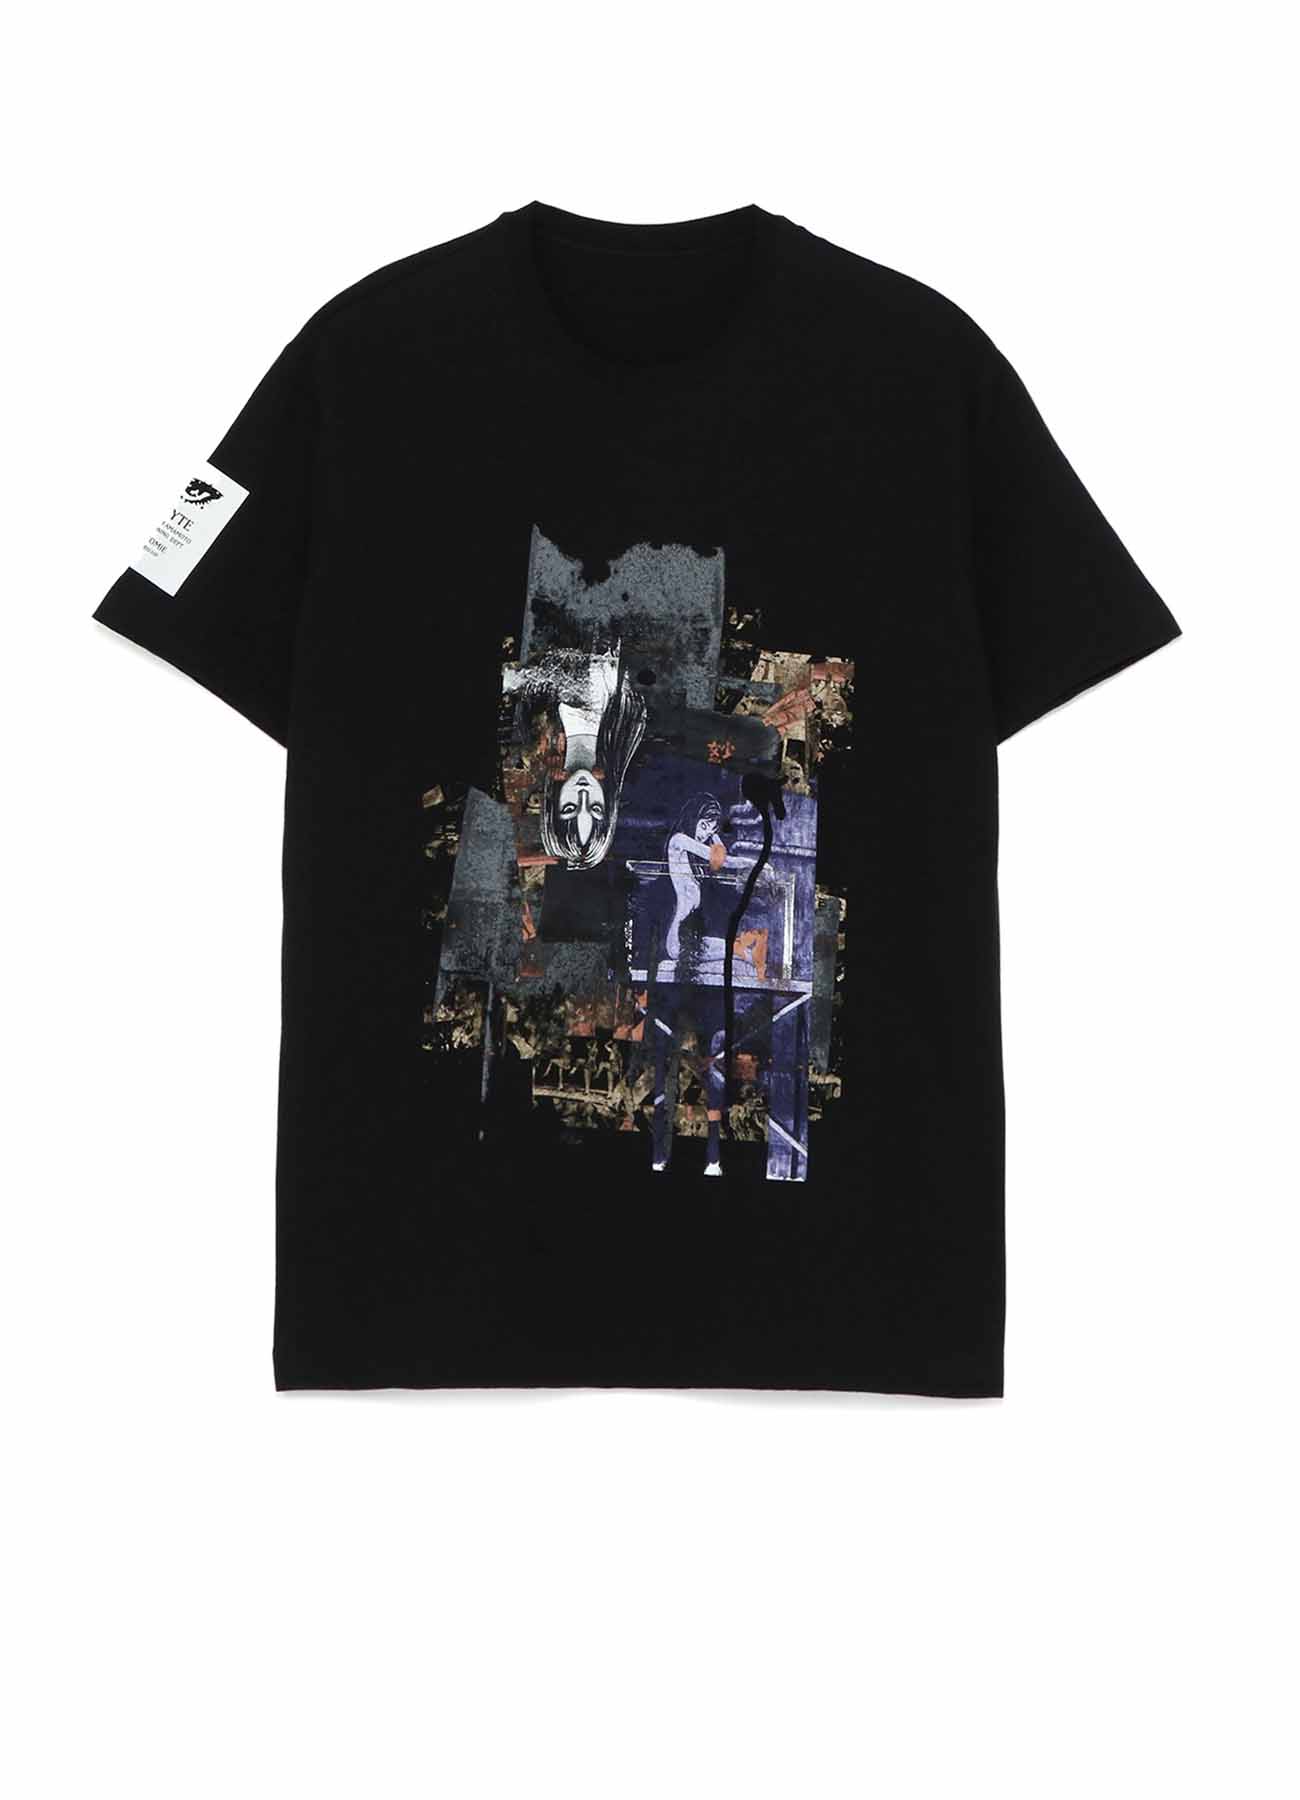 "Tomie" Masterpiece Collection Cover T-shirt